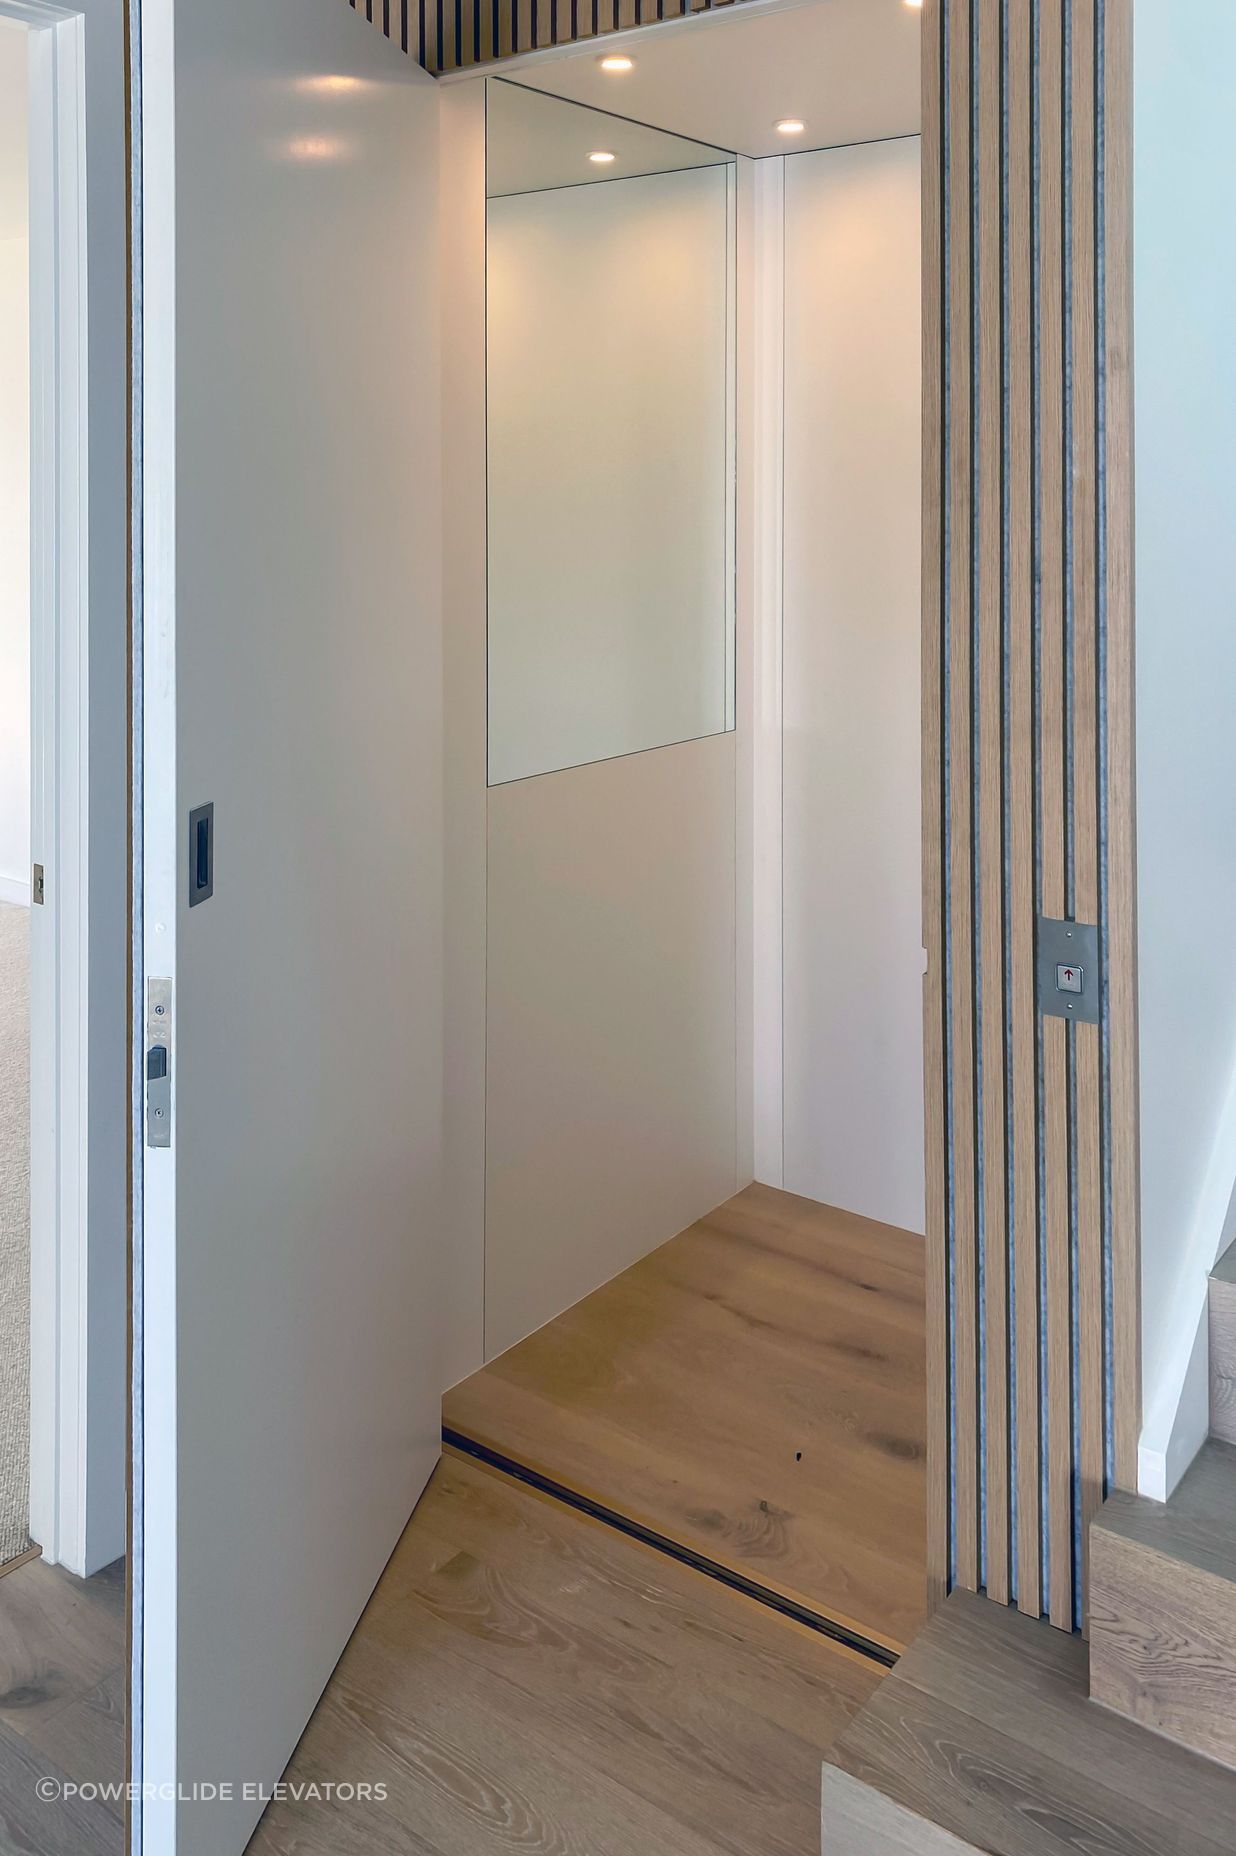 A half height mirror creates a feeling of space and the timber flooring matches the flooring in the hallway.